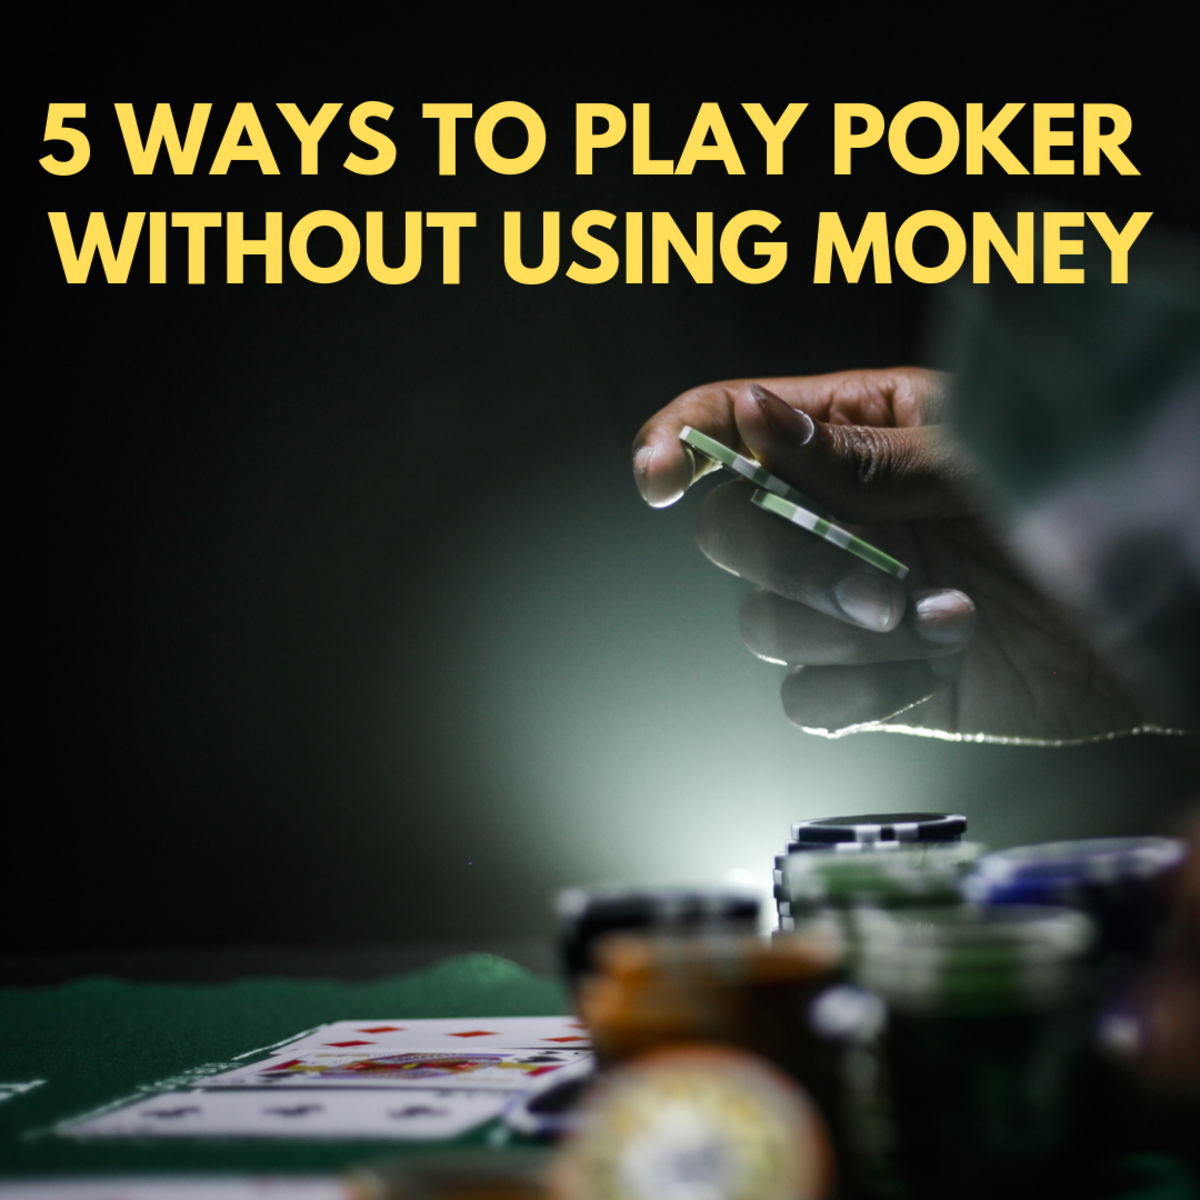 5 Ways to Play Poker Without Using Money